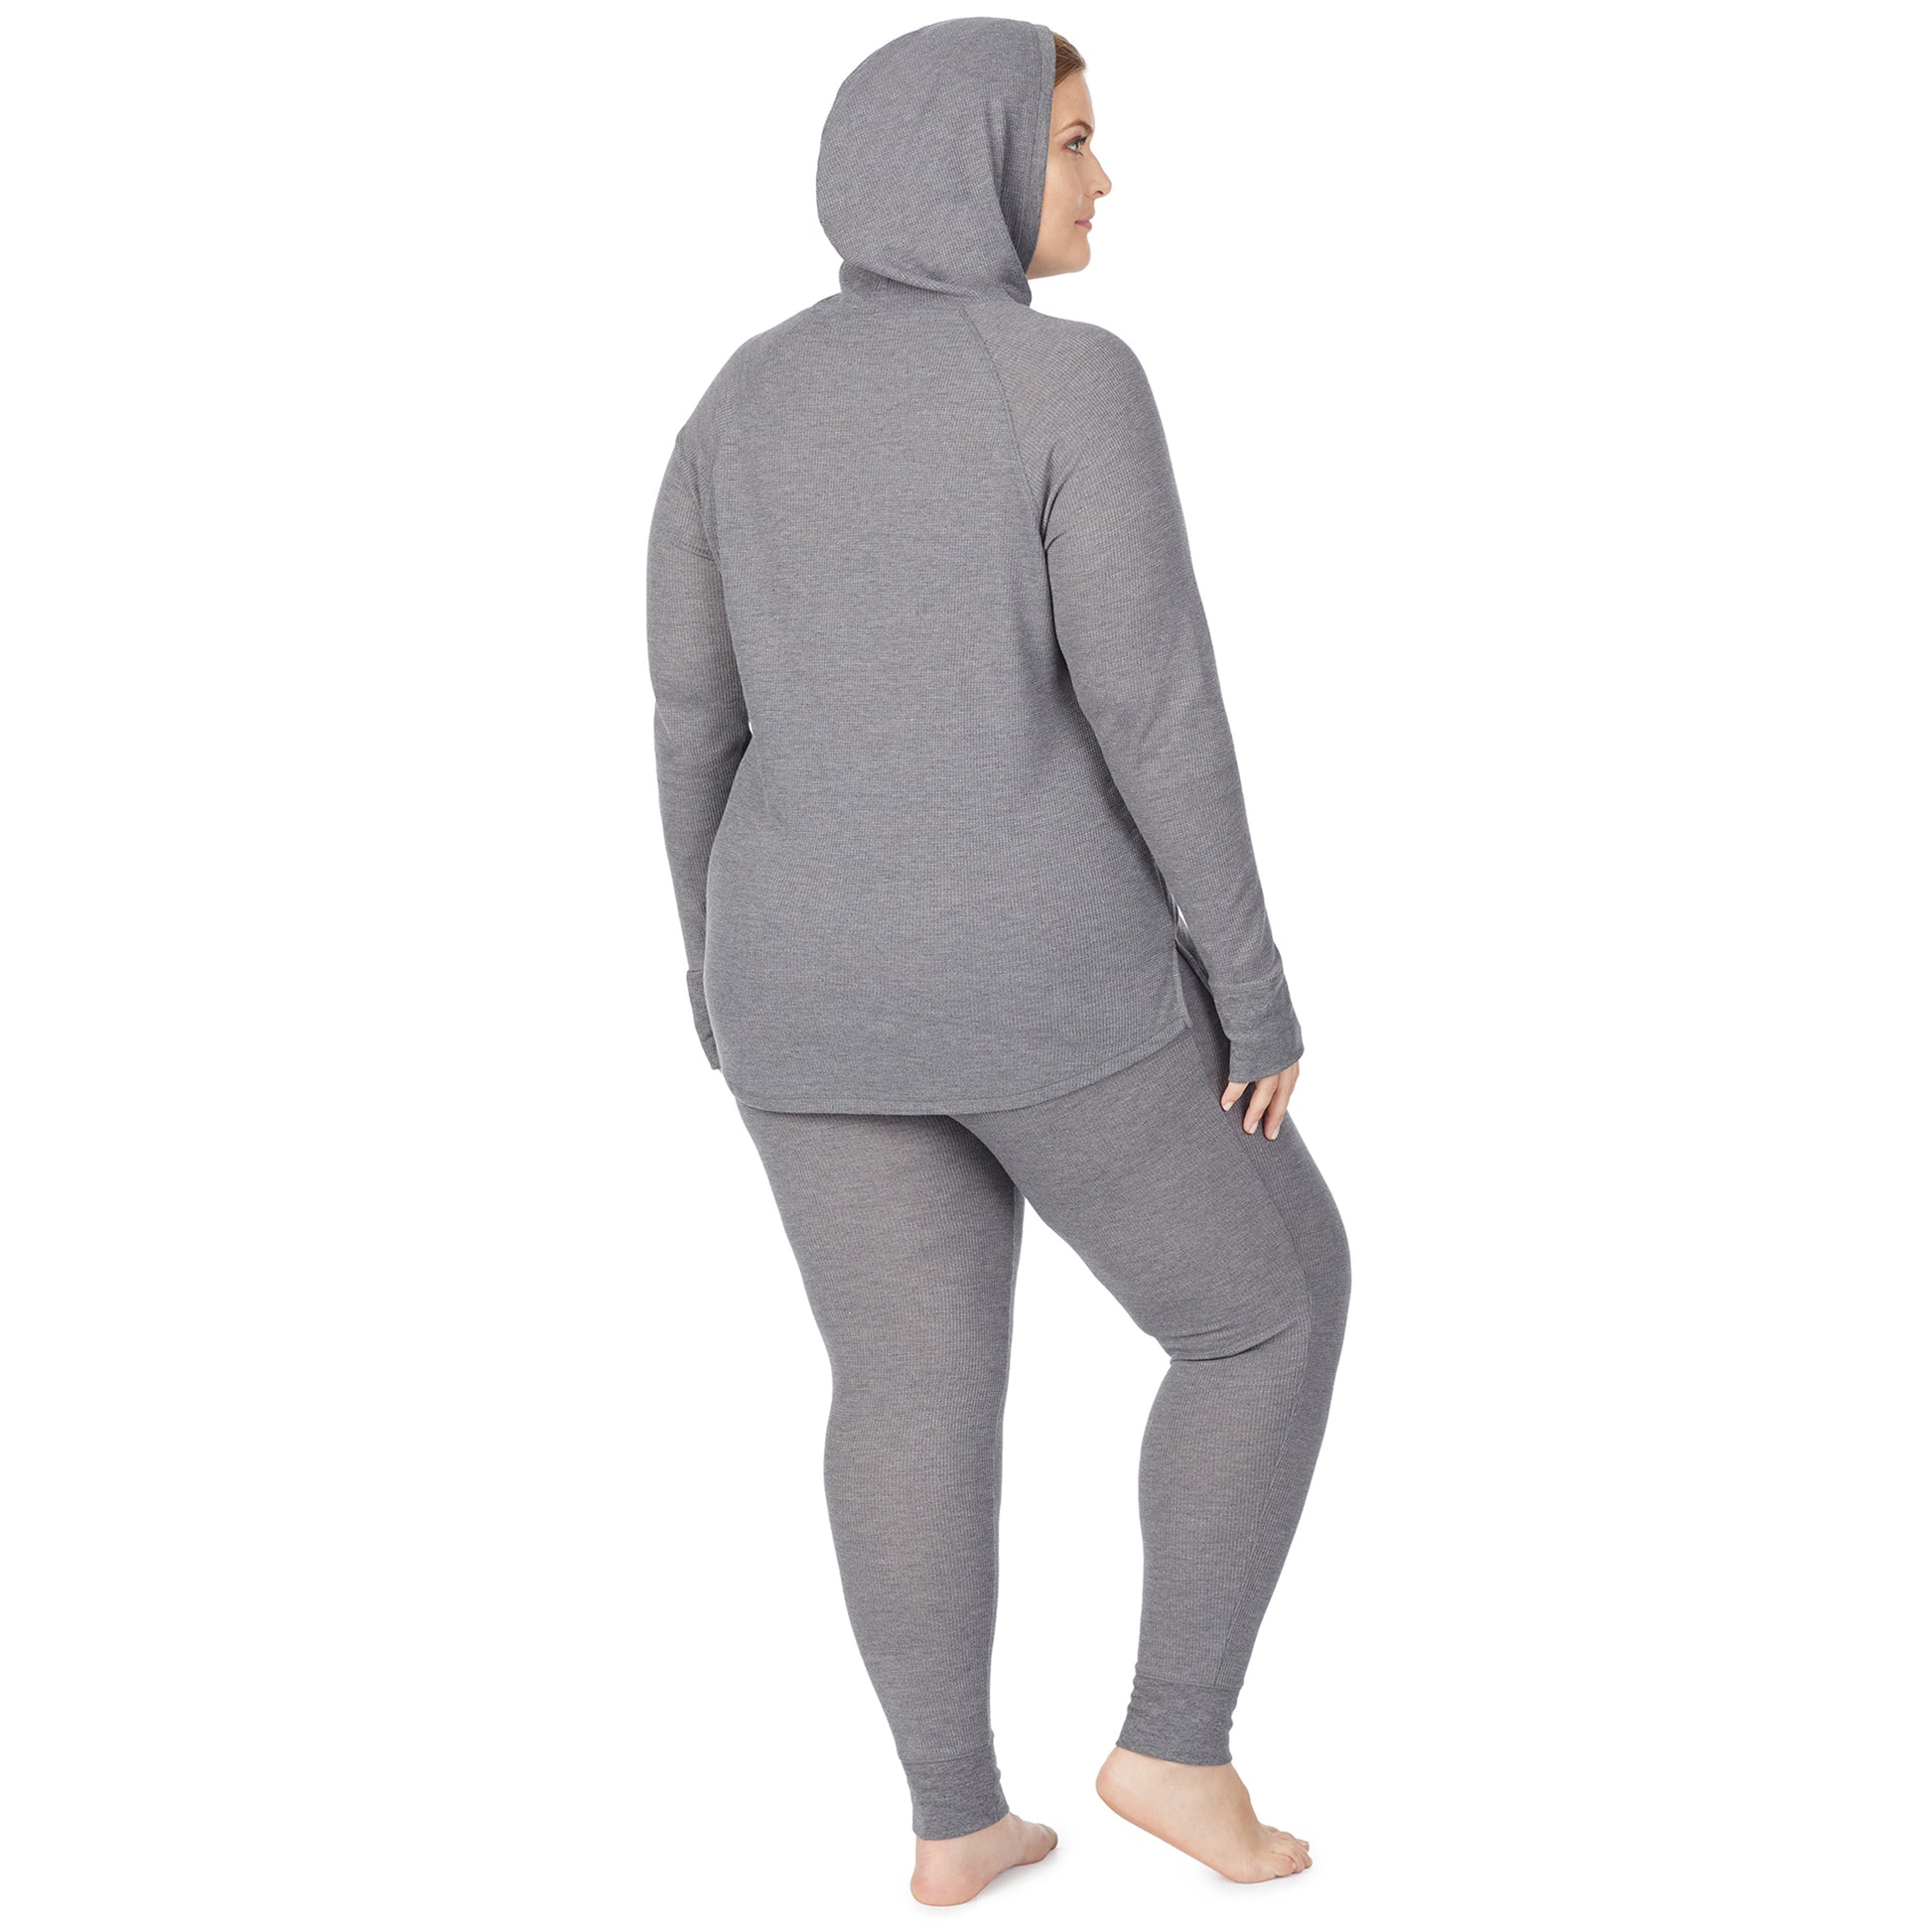 Stone Grey Heather; Model is wearing size 1X. She is 5'9", Bust 38", Waist 36", Hips 48.5". @A lady wearing a stone grey heather long sleeve hoodie tunic plus.